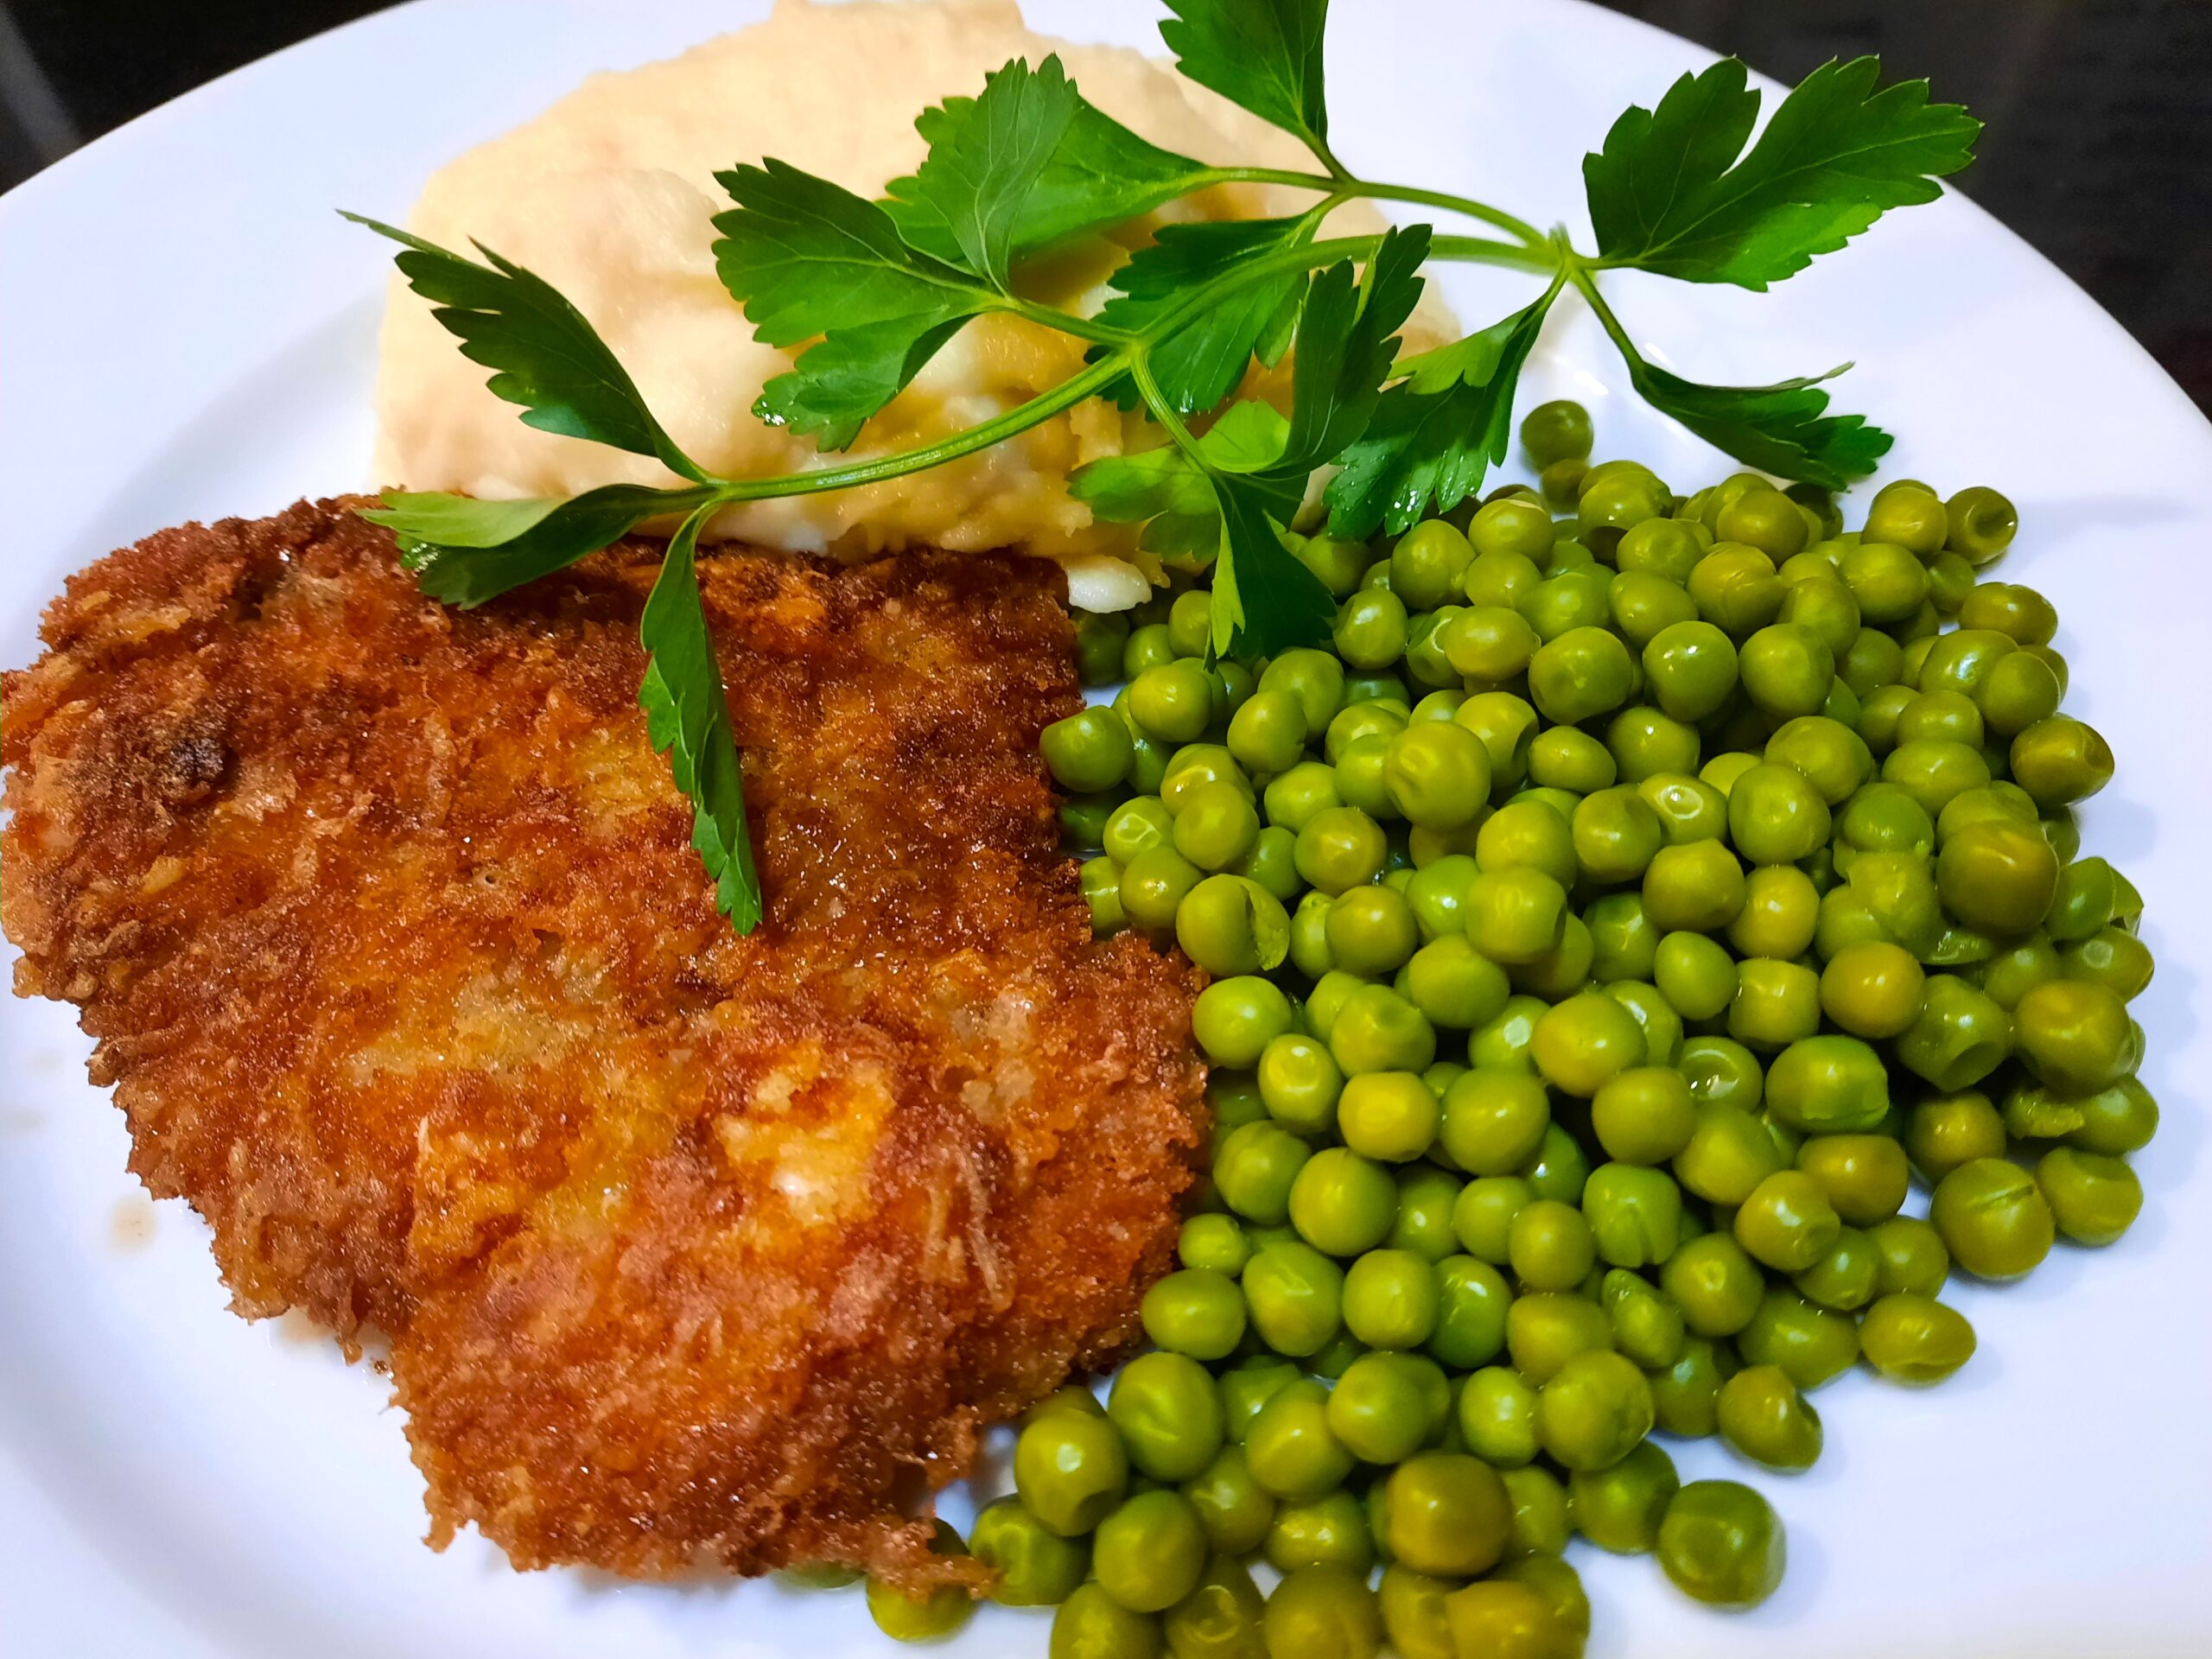 Crispy Pork Schnitzel served with mashed potatoes and peas